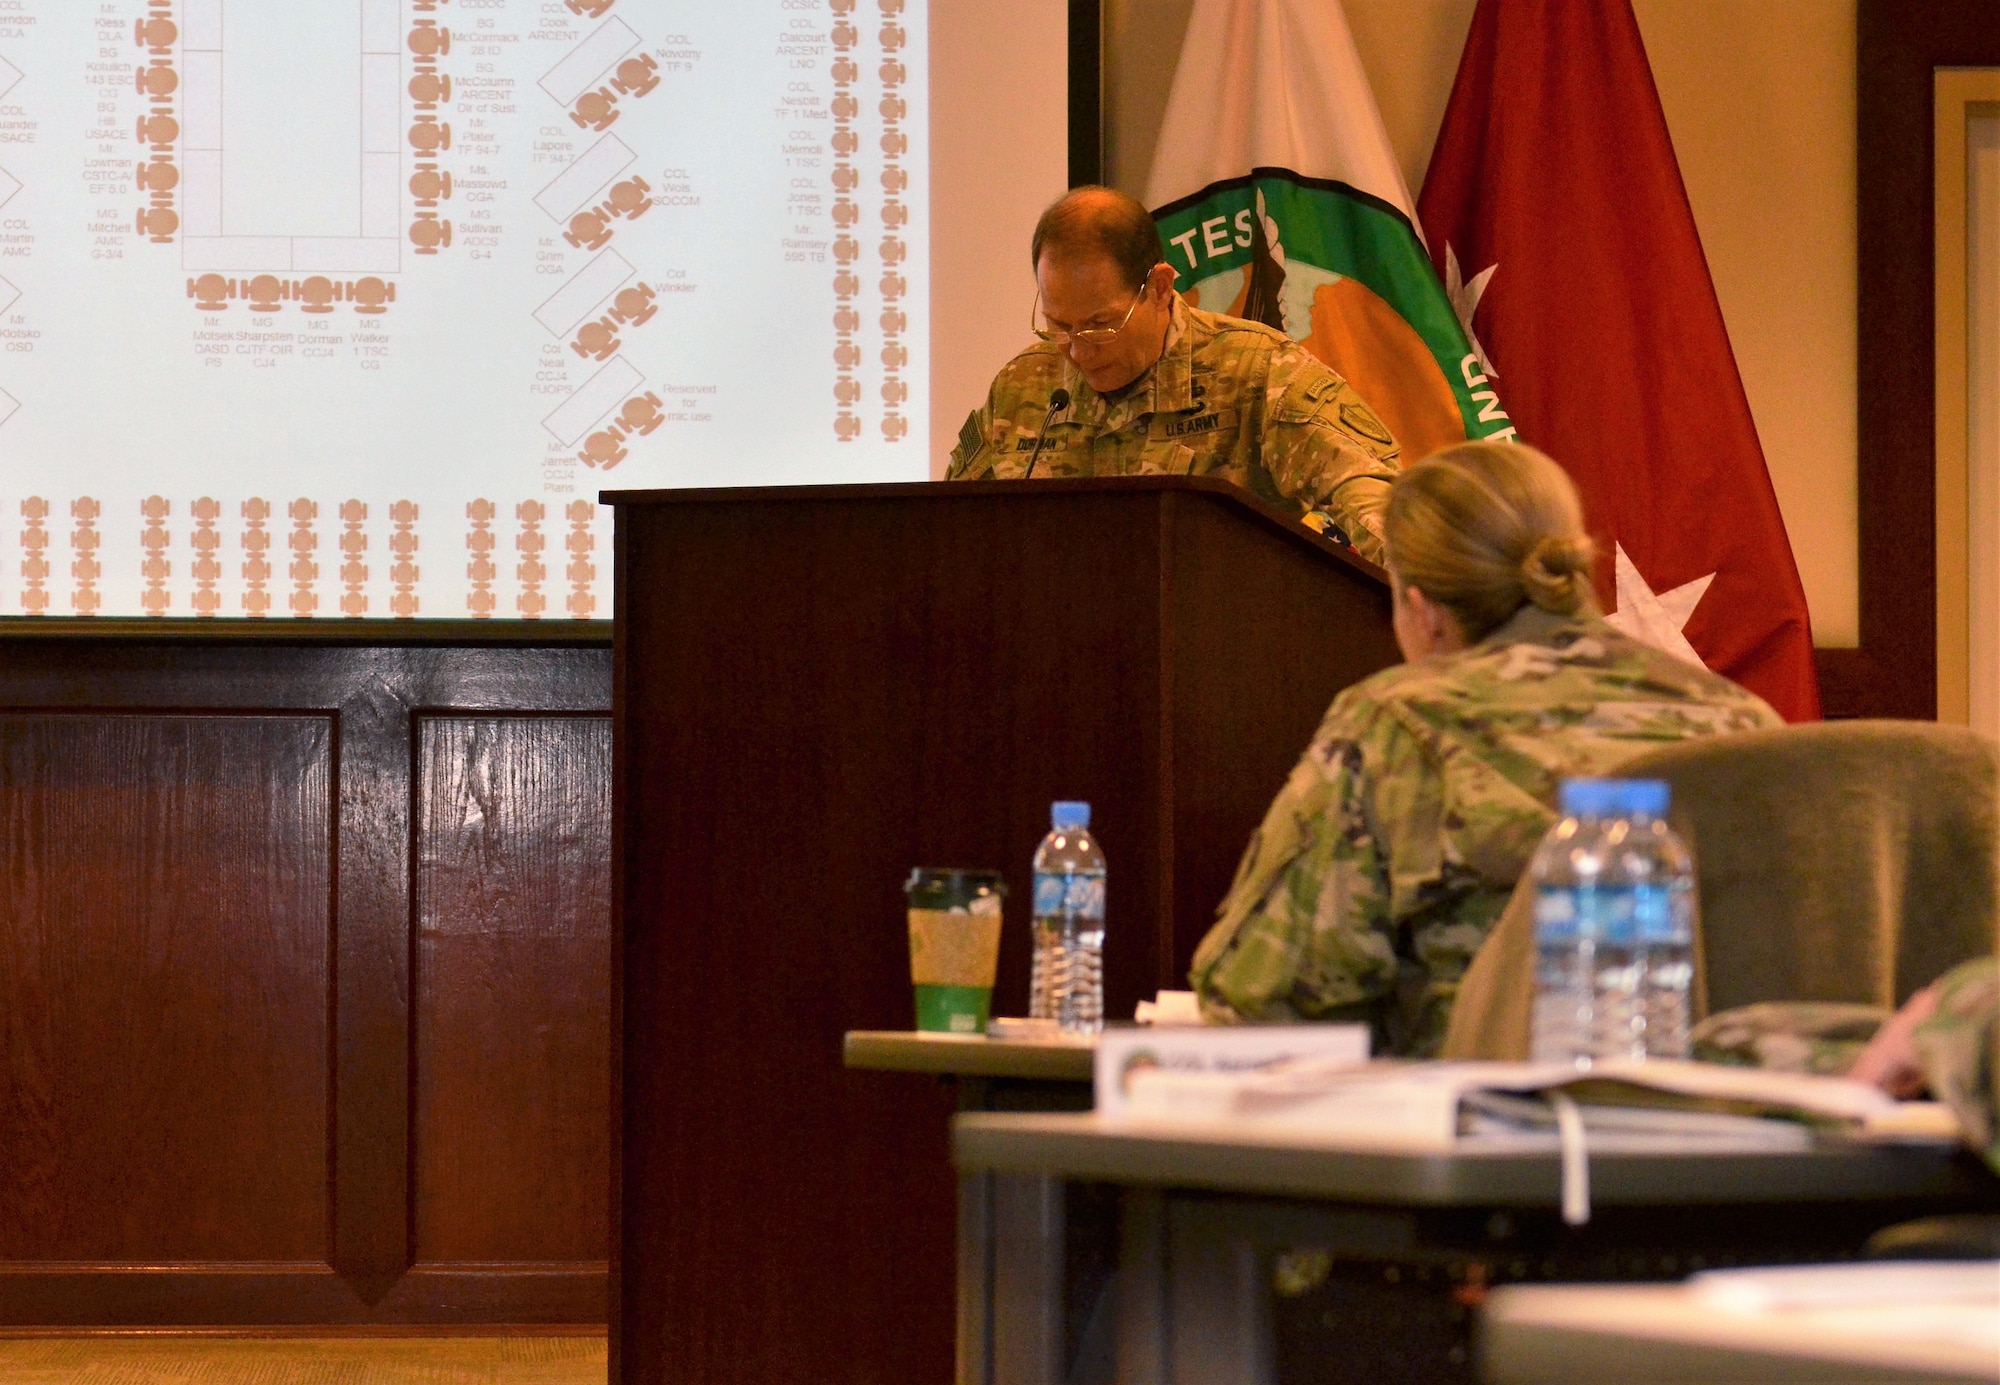 U.S. Army Major General Edward Dorman, Director of Logistics and Engineering for U.S. Central Command, addresses members of the Joint Logistics Coordination Board during a conference at Al Udeid Air Base, Qatar on 9 May, 2018. Dorman urged participants to stay focused on sustaining the fight and setting the theater as a means to support military operations. (U.S. Air Force photo by Senior Airman Patrick Wyatt)